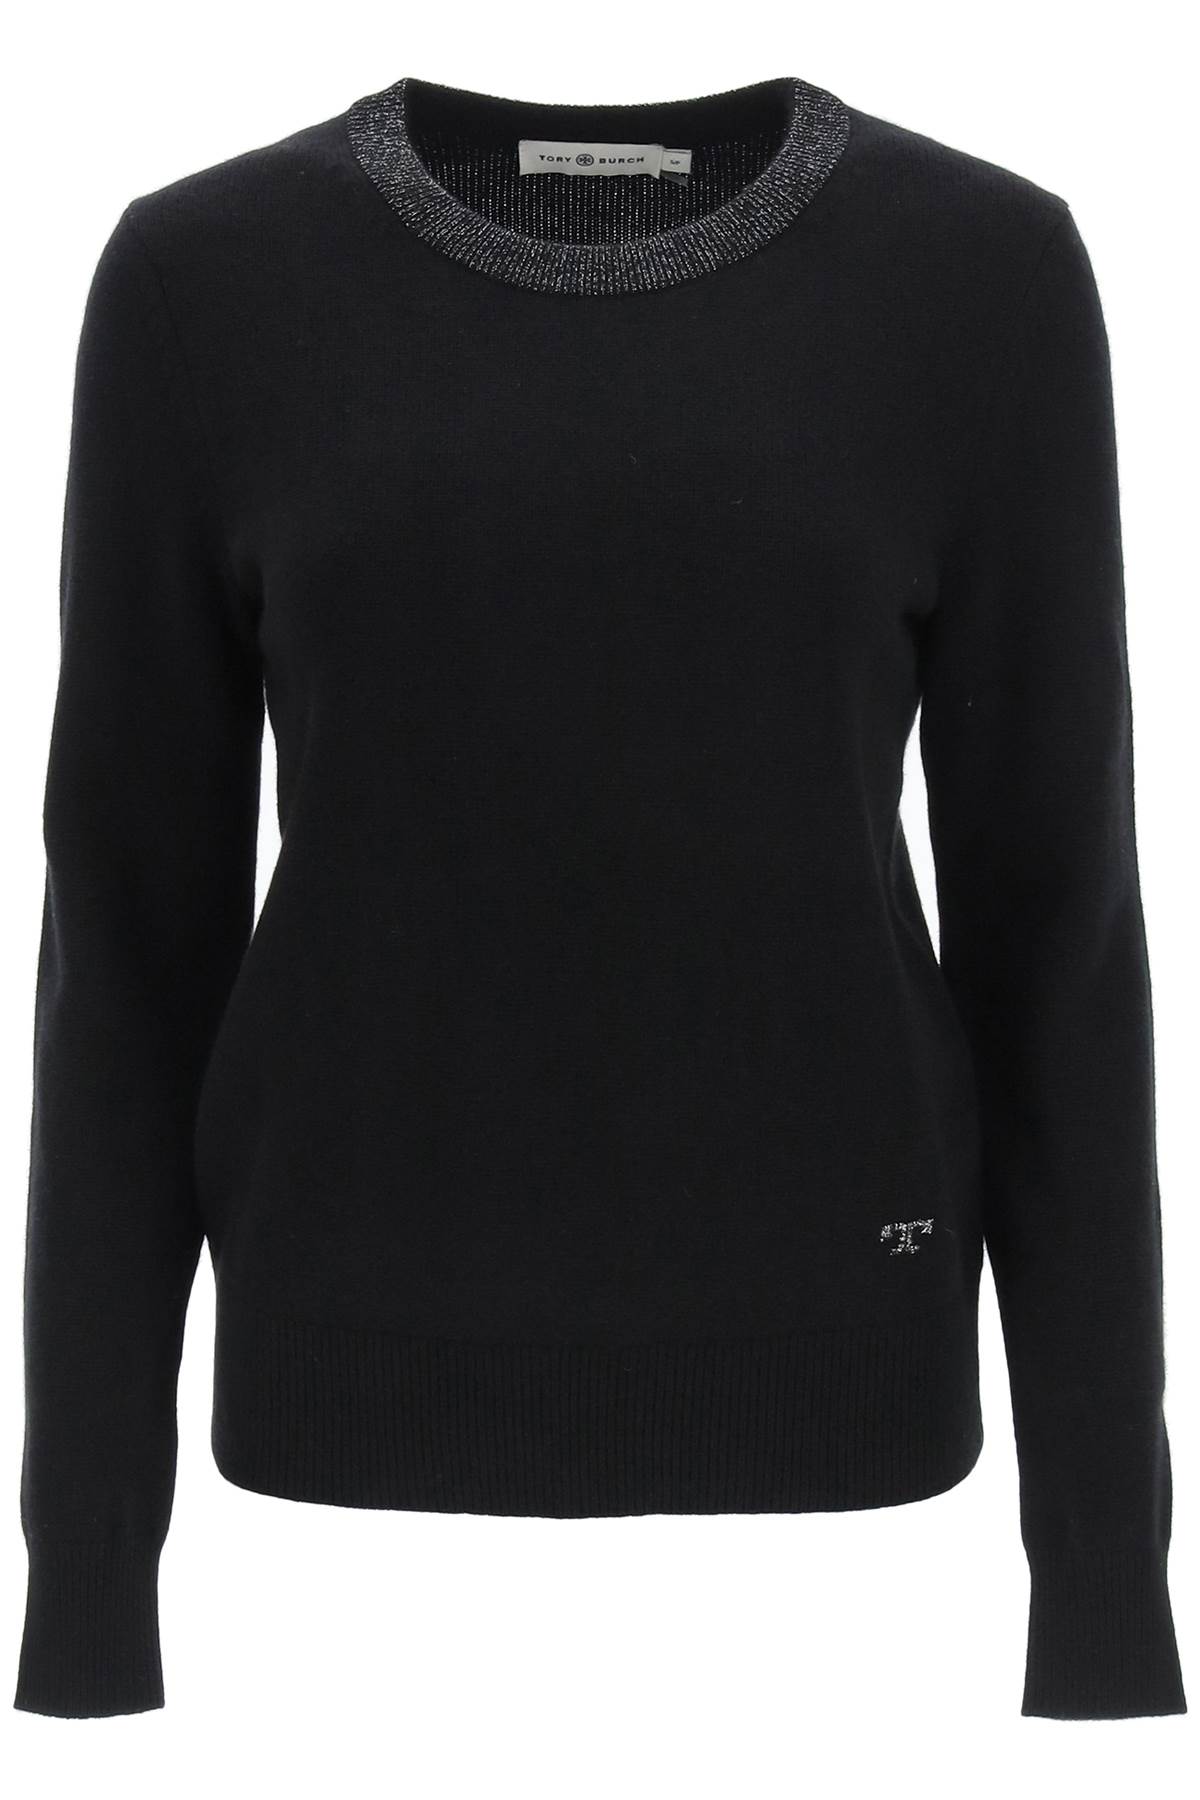 Tory Burch Cashmere Sweater With Lurex